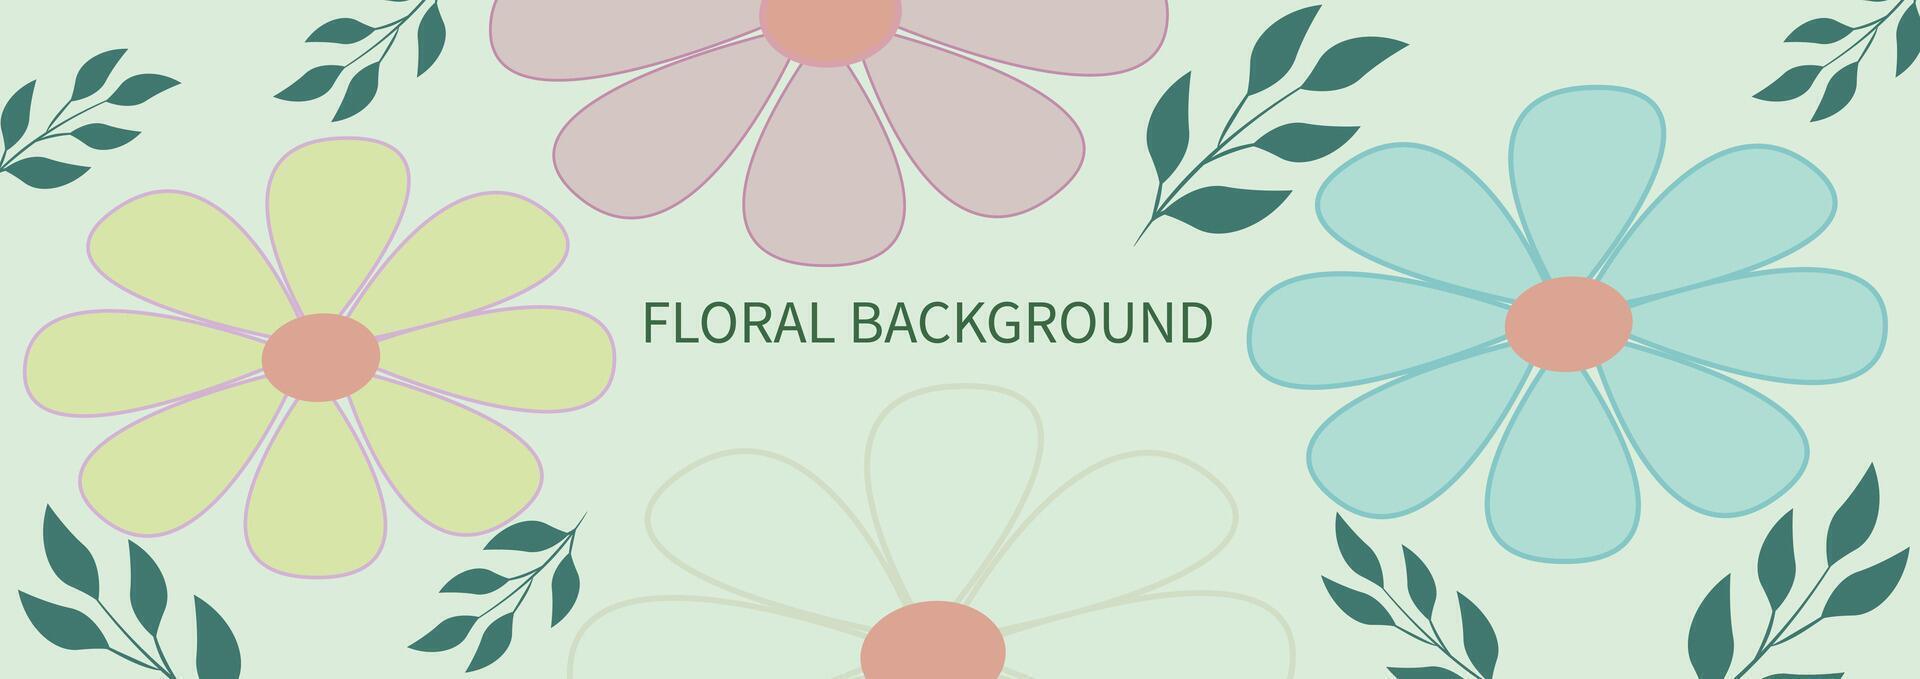 Floral art background vector illustration. Floral trendy background, horizontal poster with flowers, daisies, leaes. Hand drawn floral vector template. Perfect for card, banner.